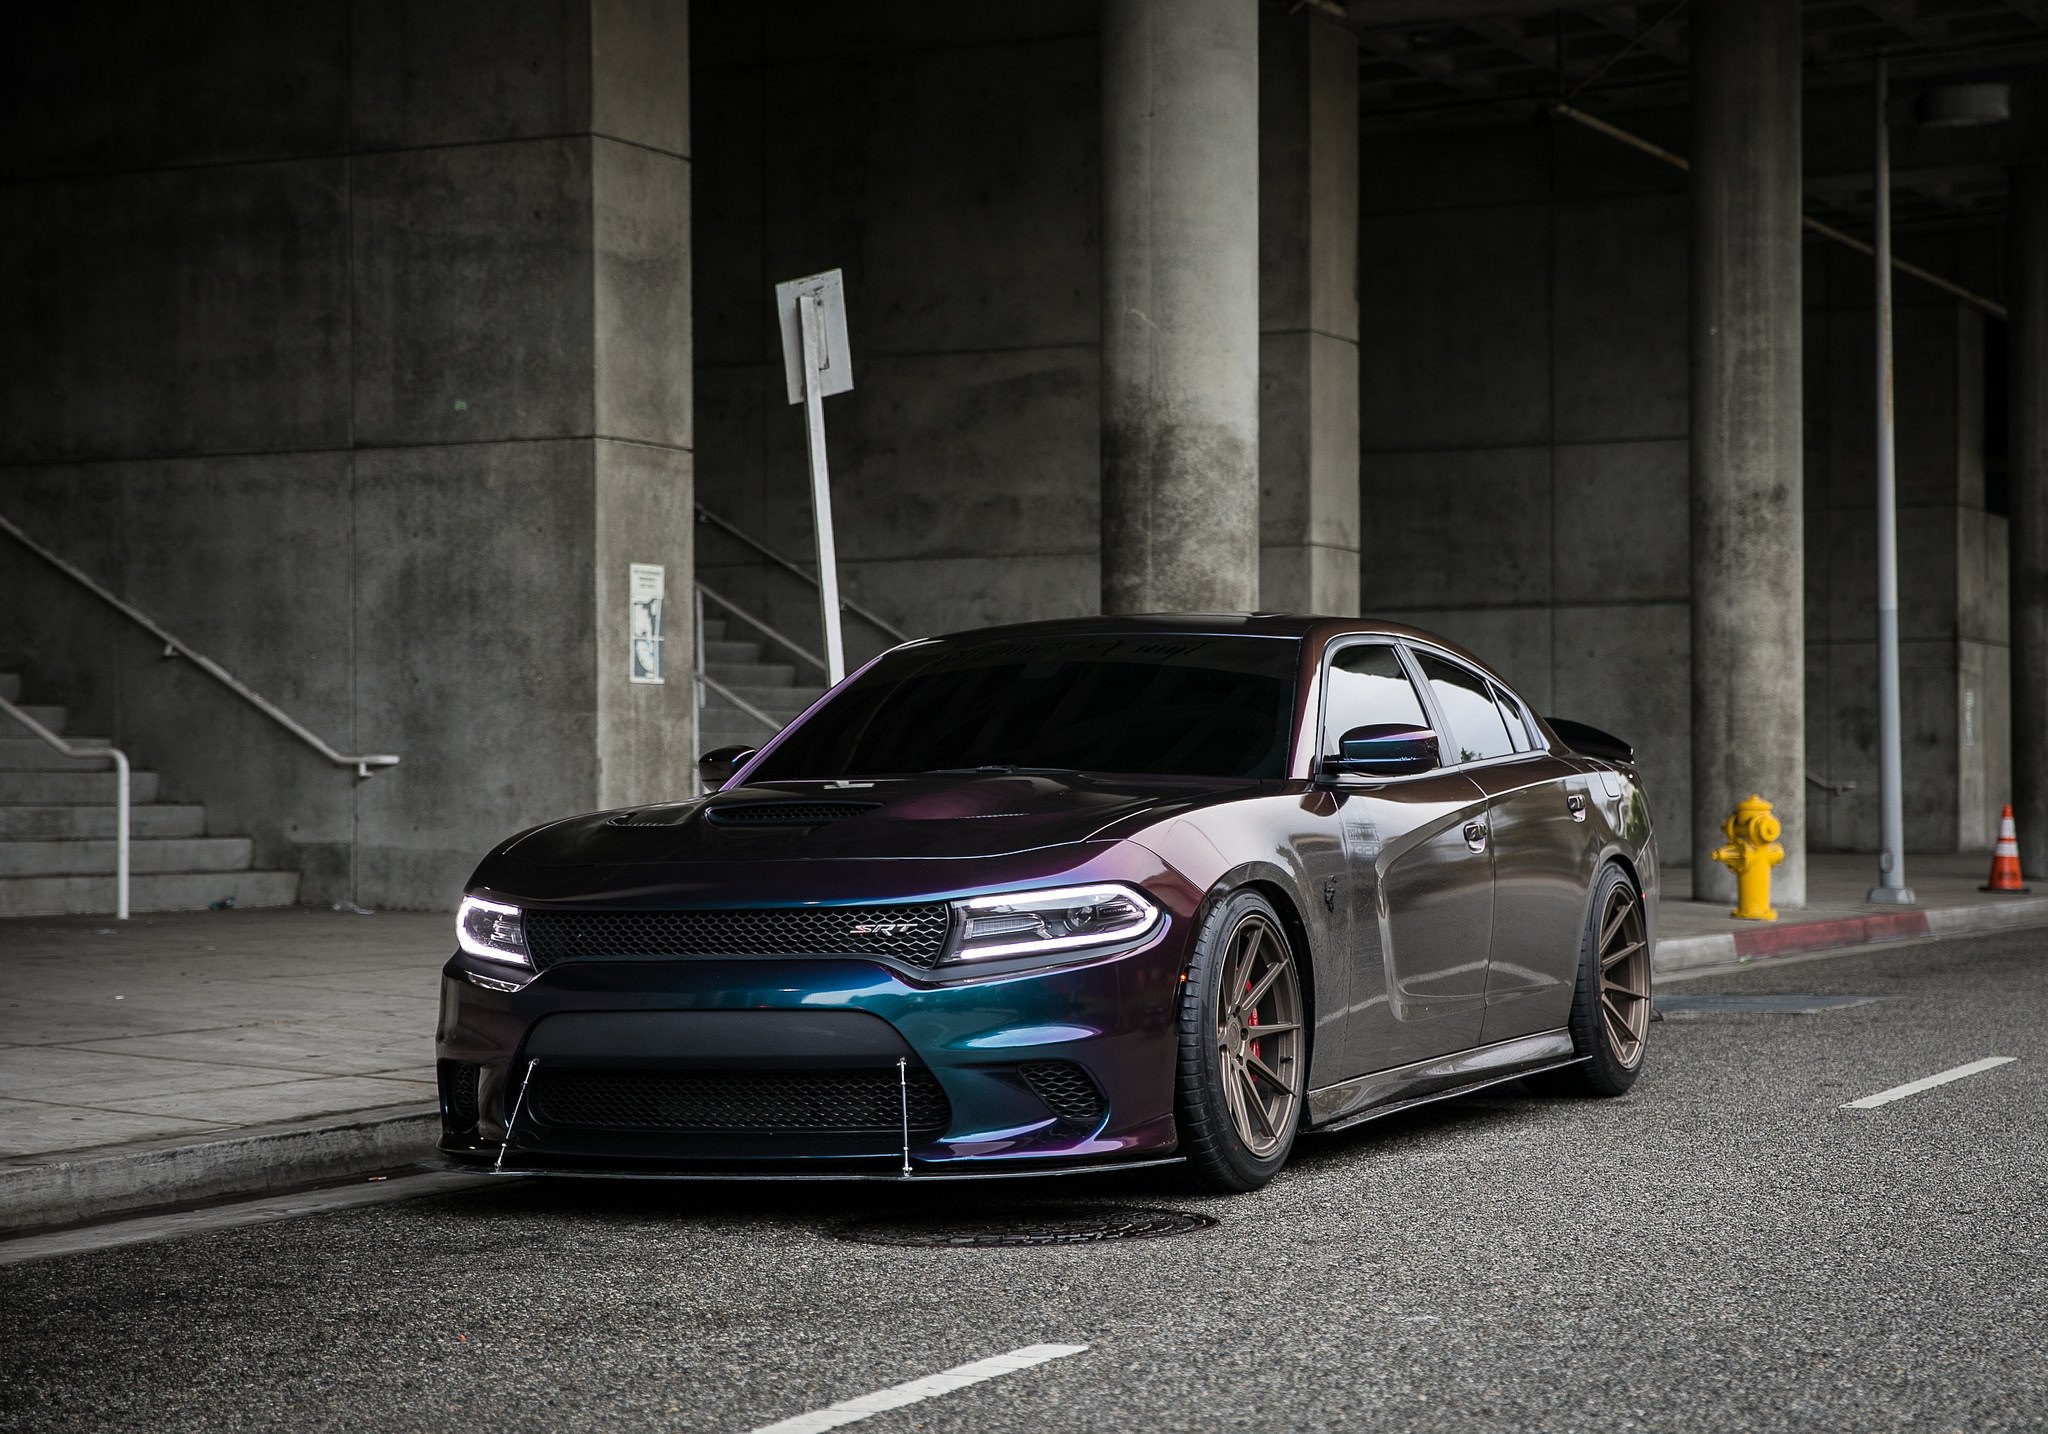 Chameleon Dodge Charger SRT with LED-Bar Style Headlights - Photo by Vertini Wheels